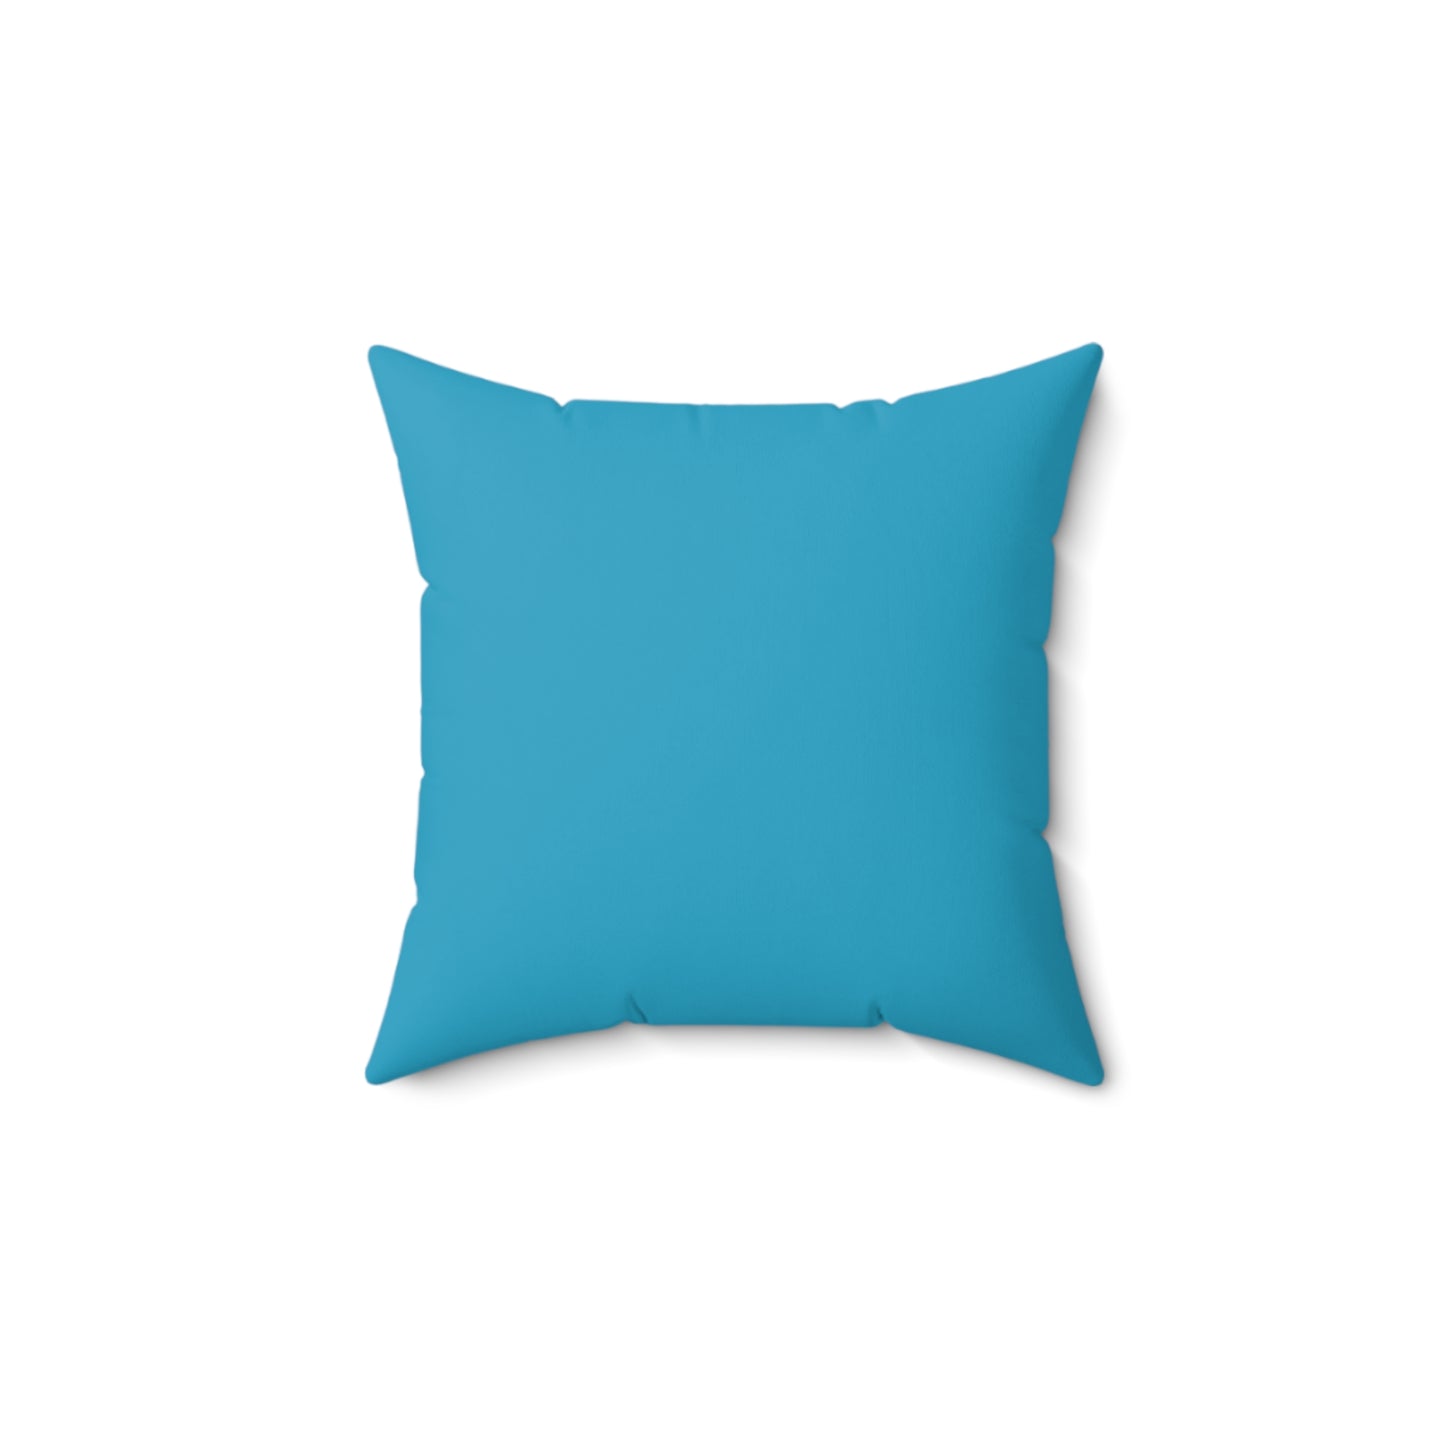 “Peace and Life” by Inbal Singer Faux Suede Square Pillow (Turquoise)